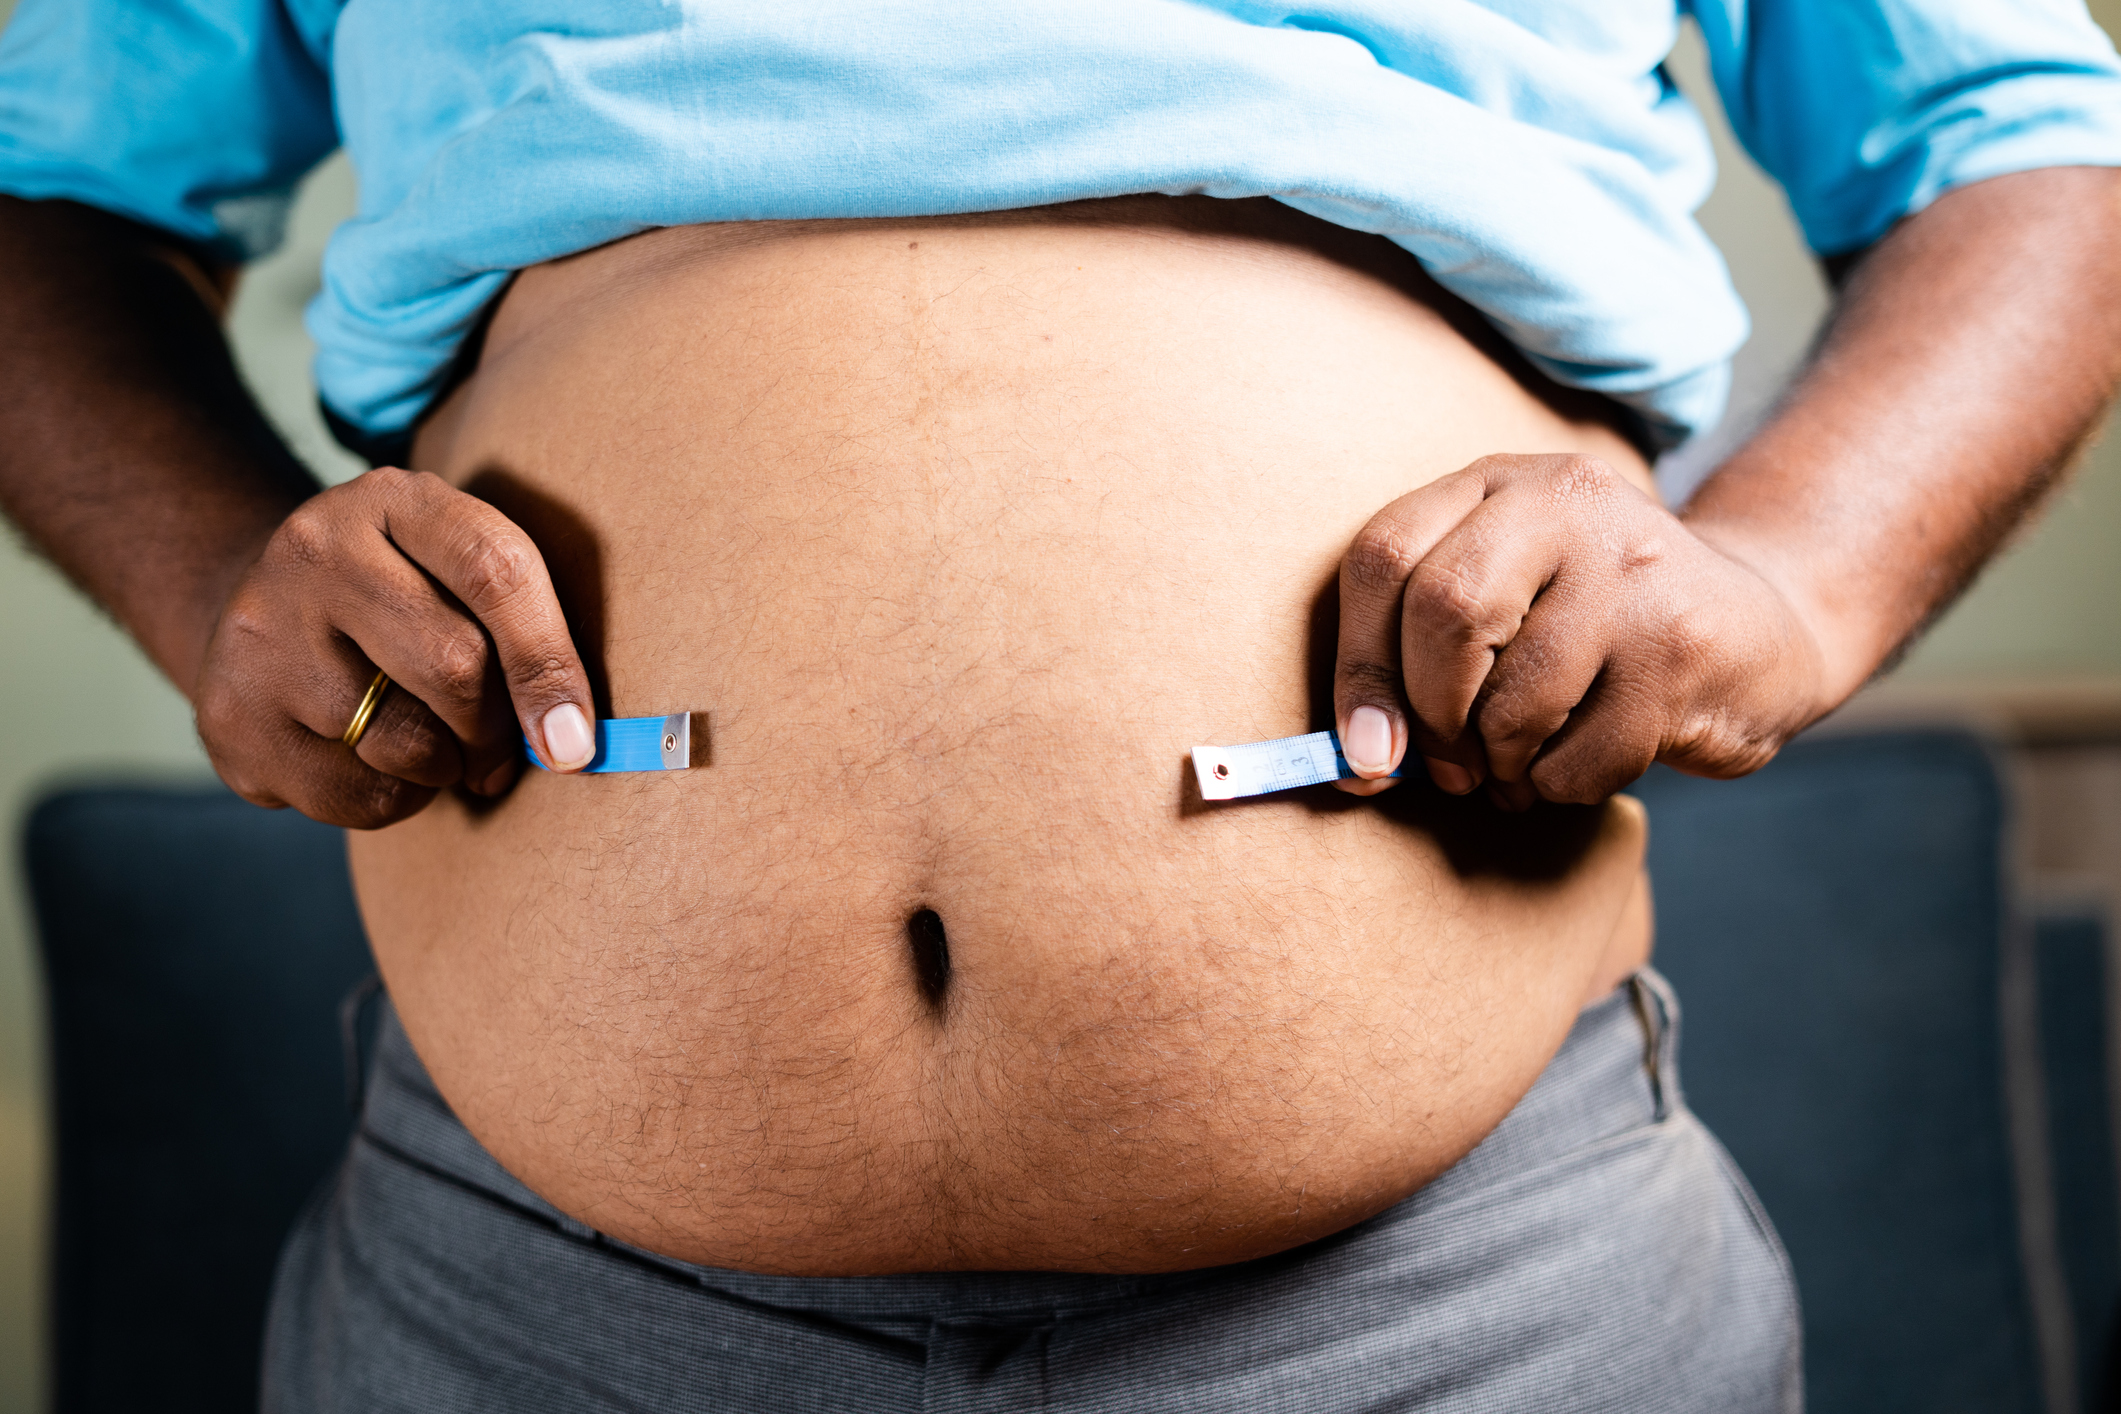 An image of an obese man measuring his bulging stomach.